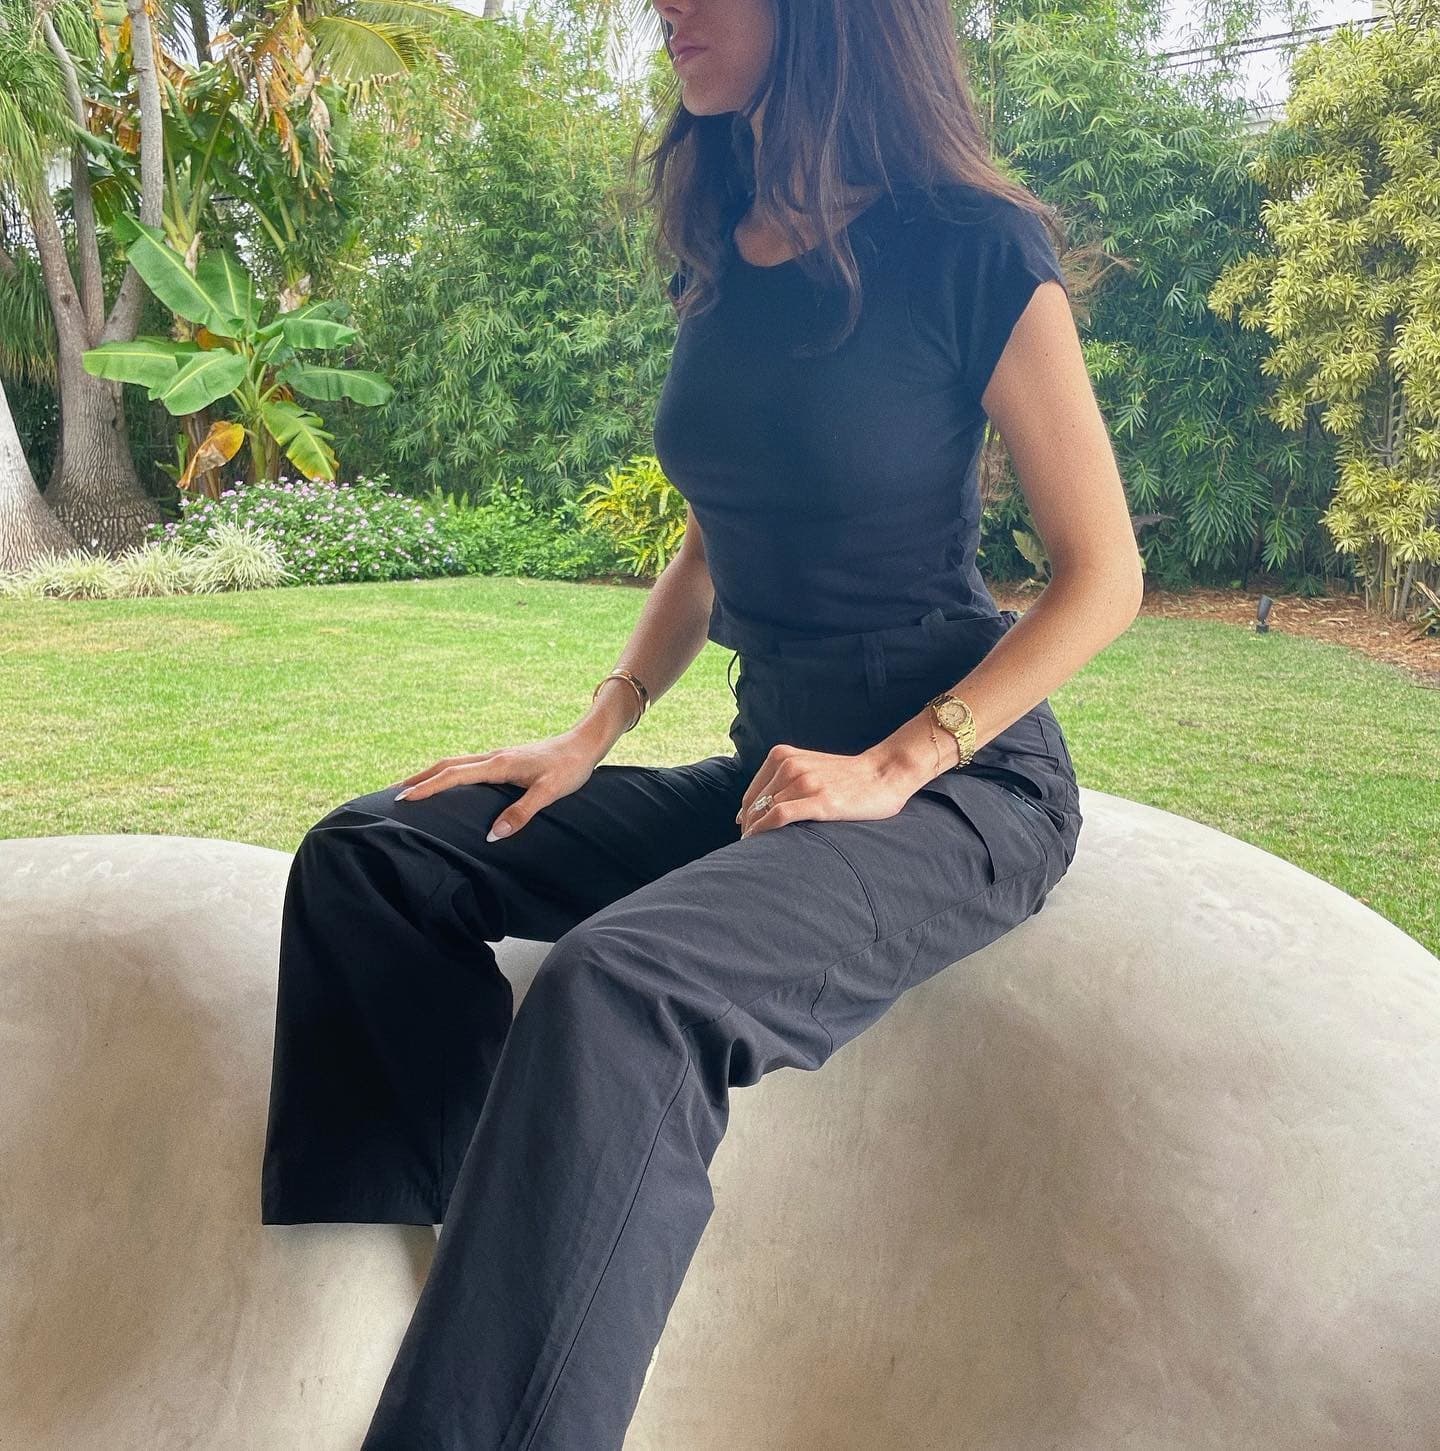 All The Trousers: Tailored, Transitional & Trending | Alo Yoga